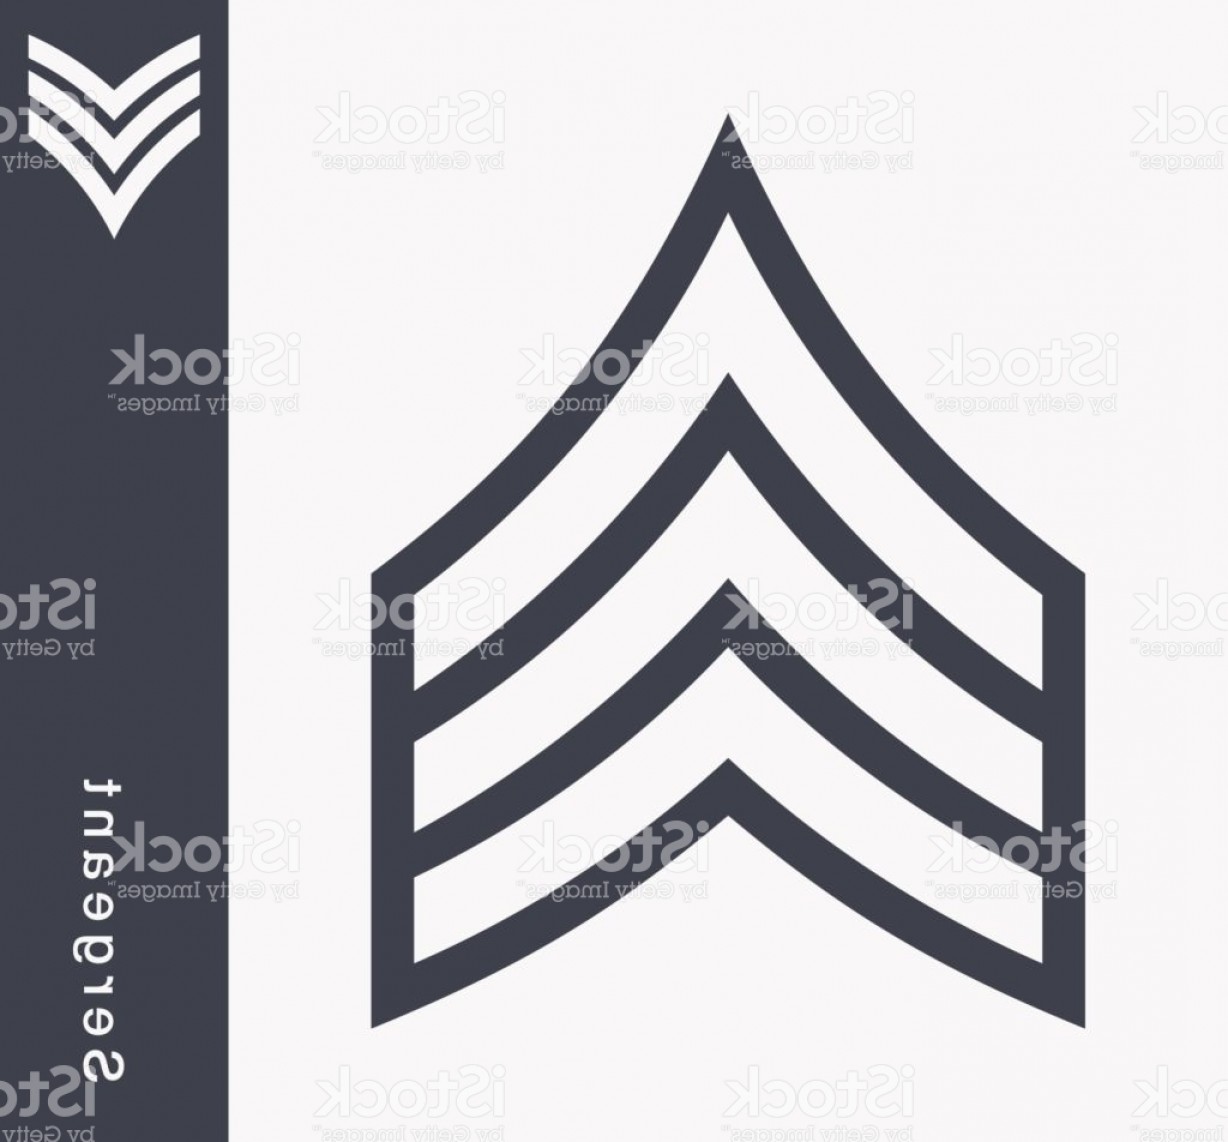 Military Star Vector at GetDrawings.com | Free for personal use